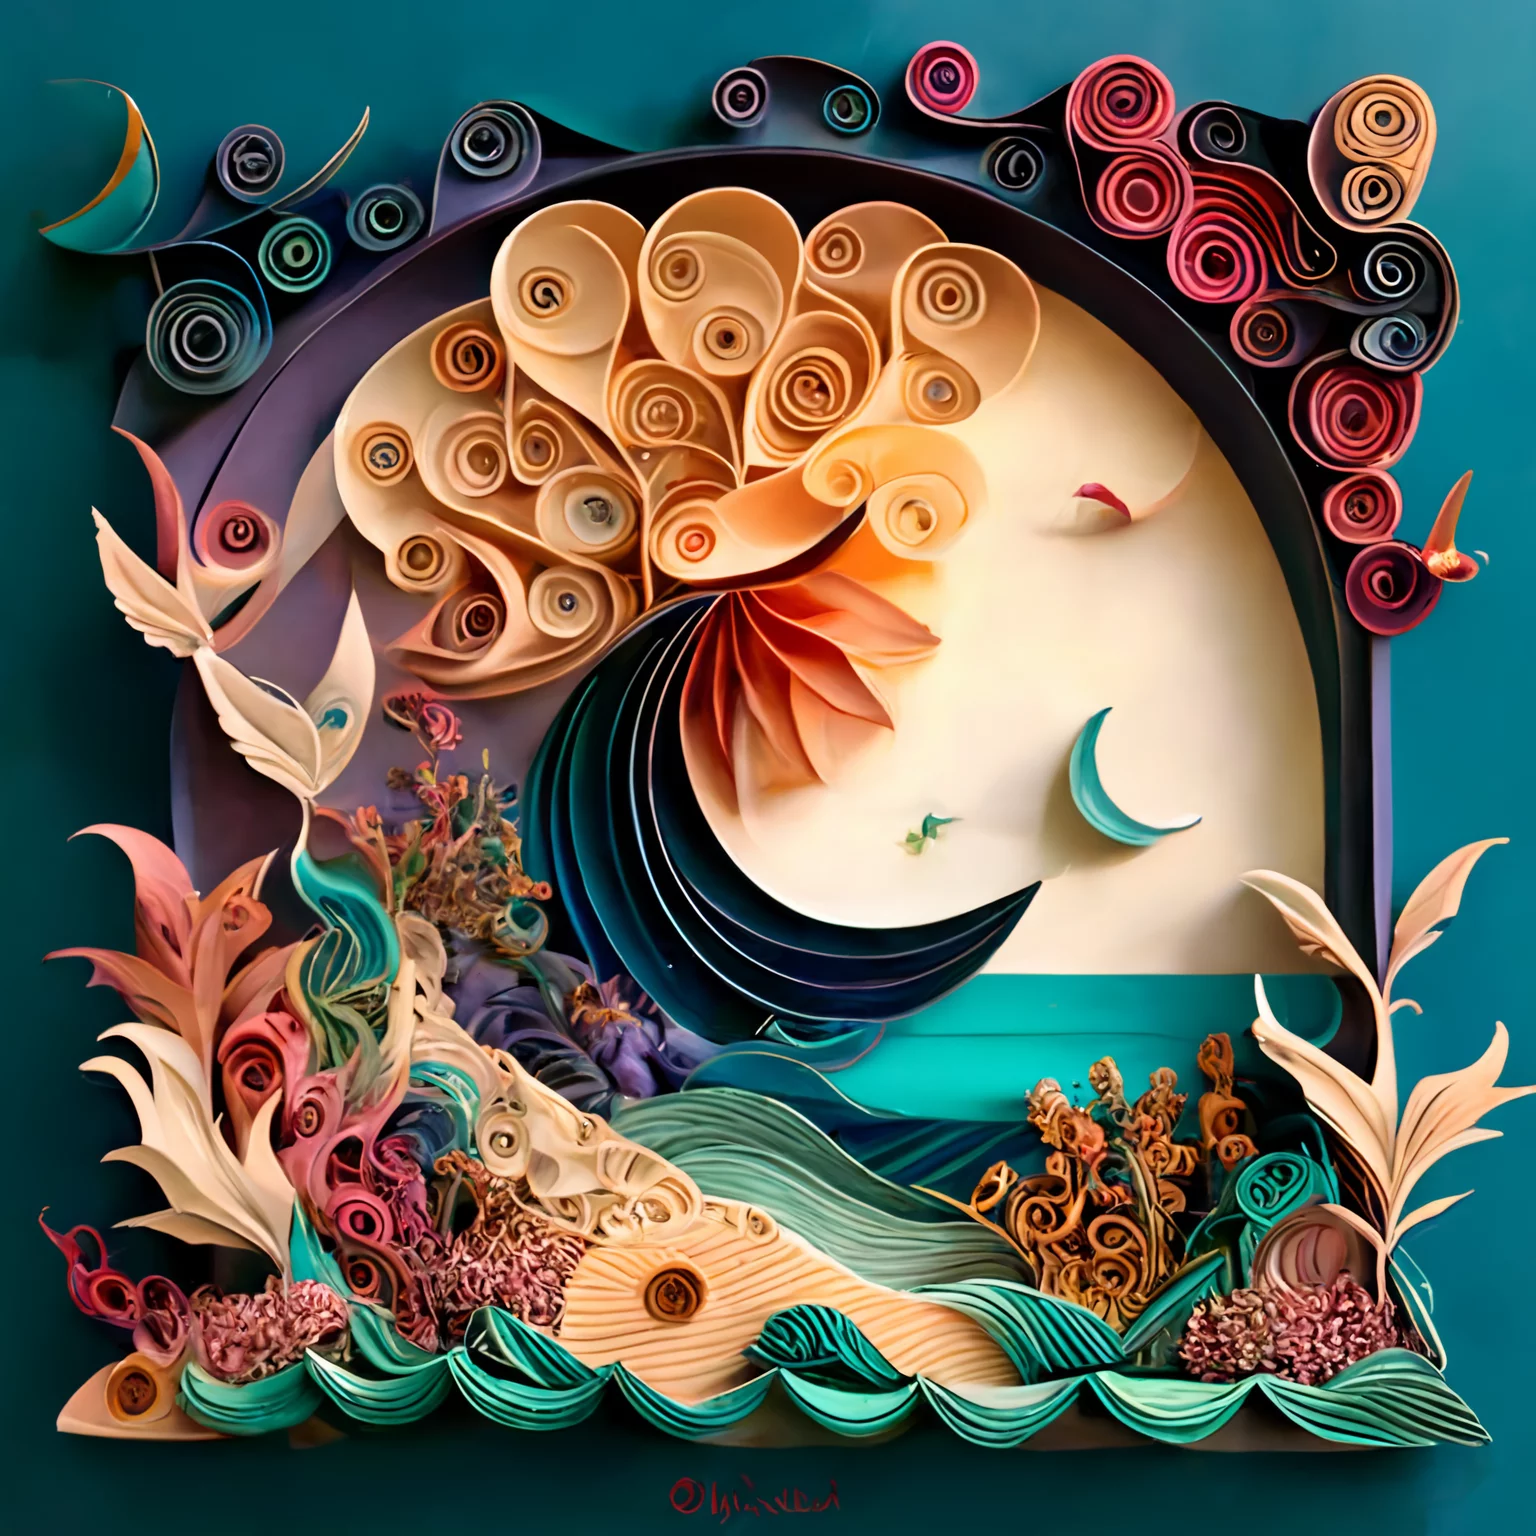 Surreal Quilling Composition